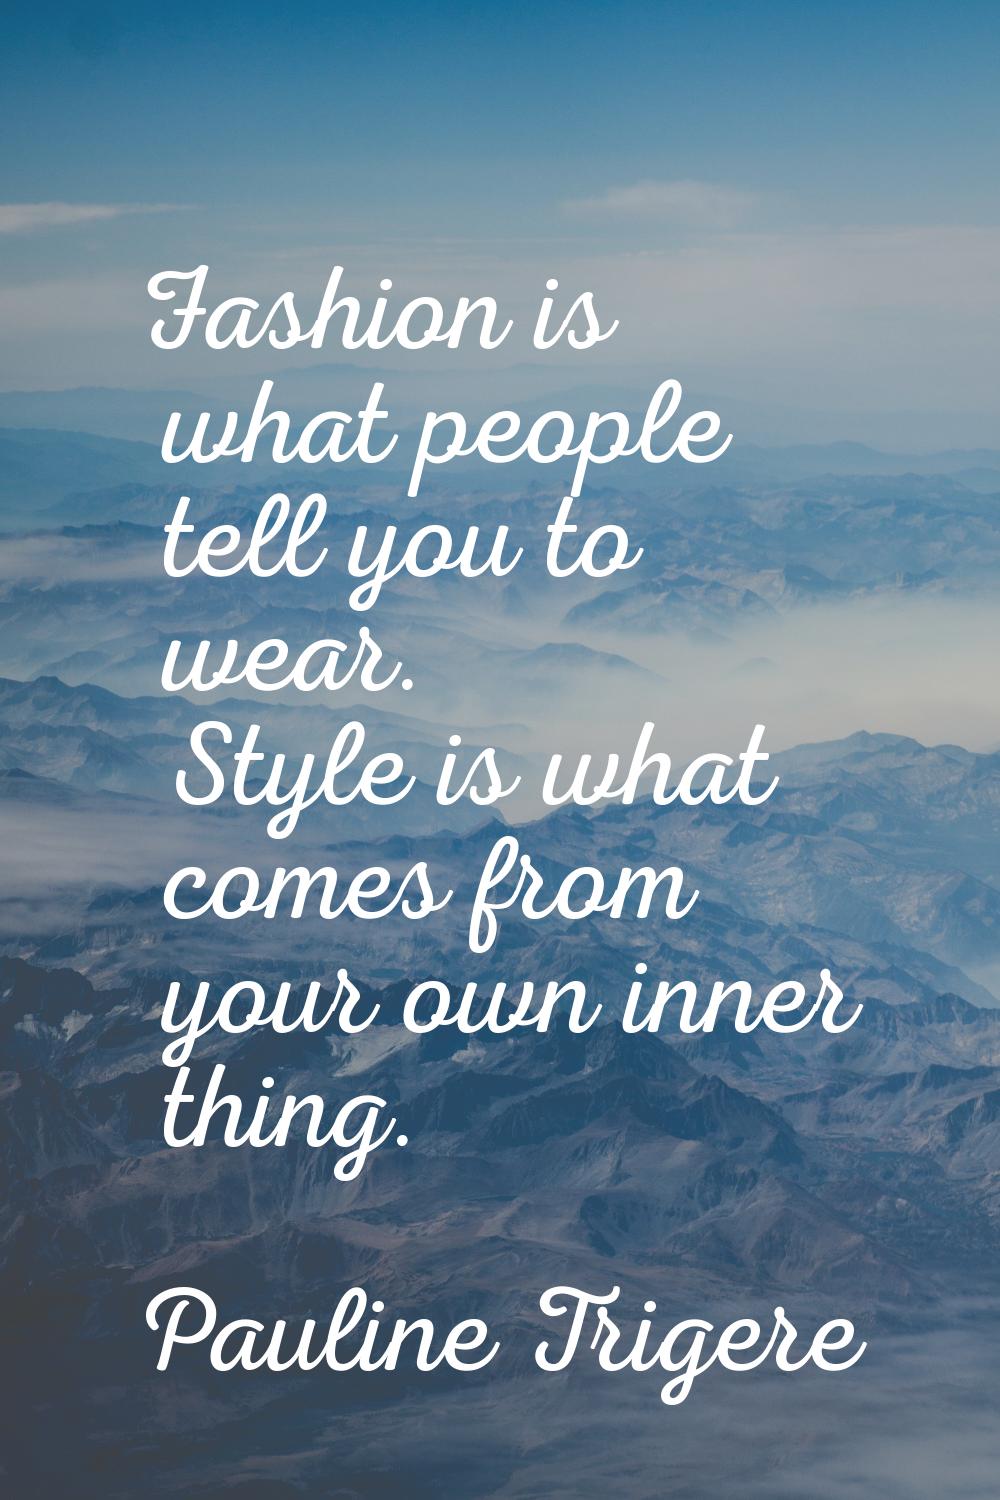 Fashion is what people tell you to wear. Style is what comes from your own inner thing.